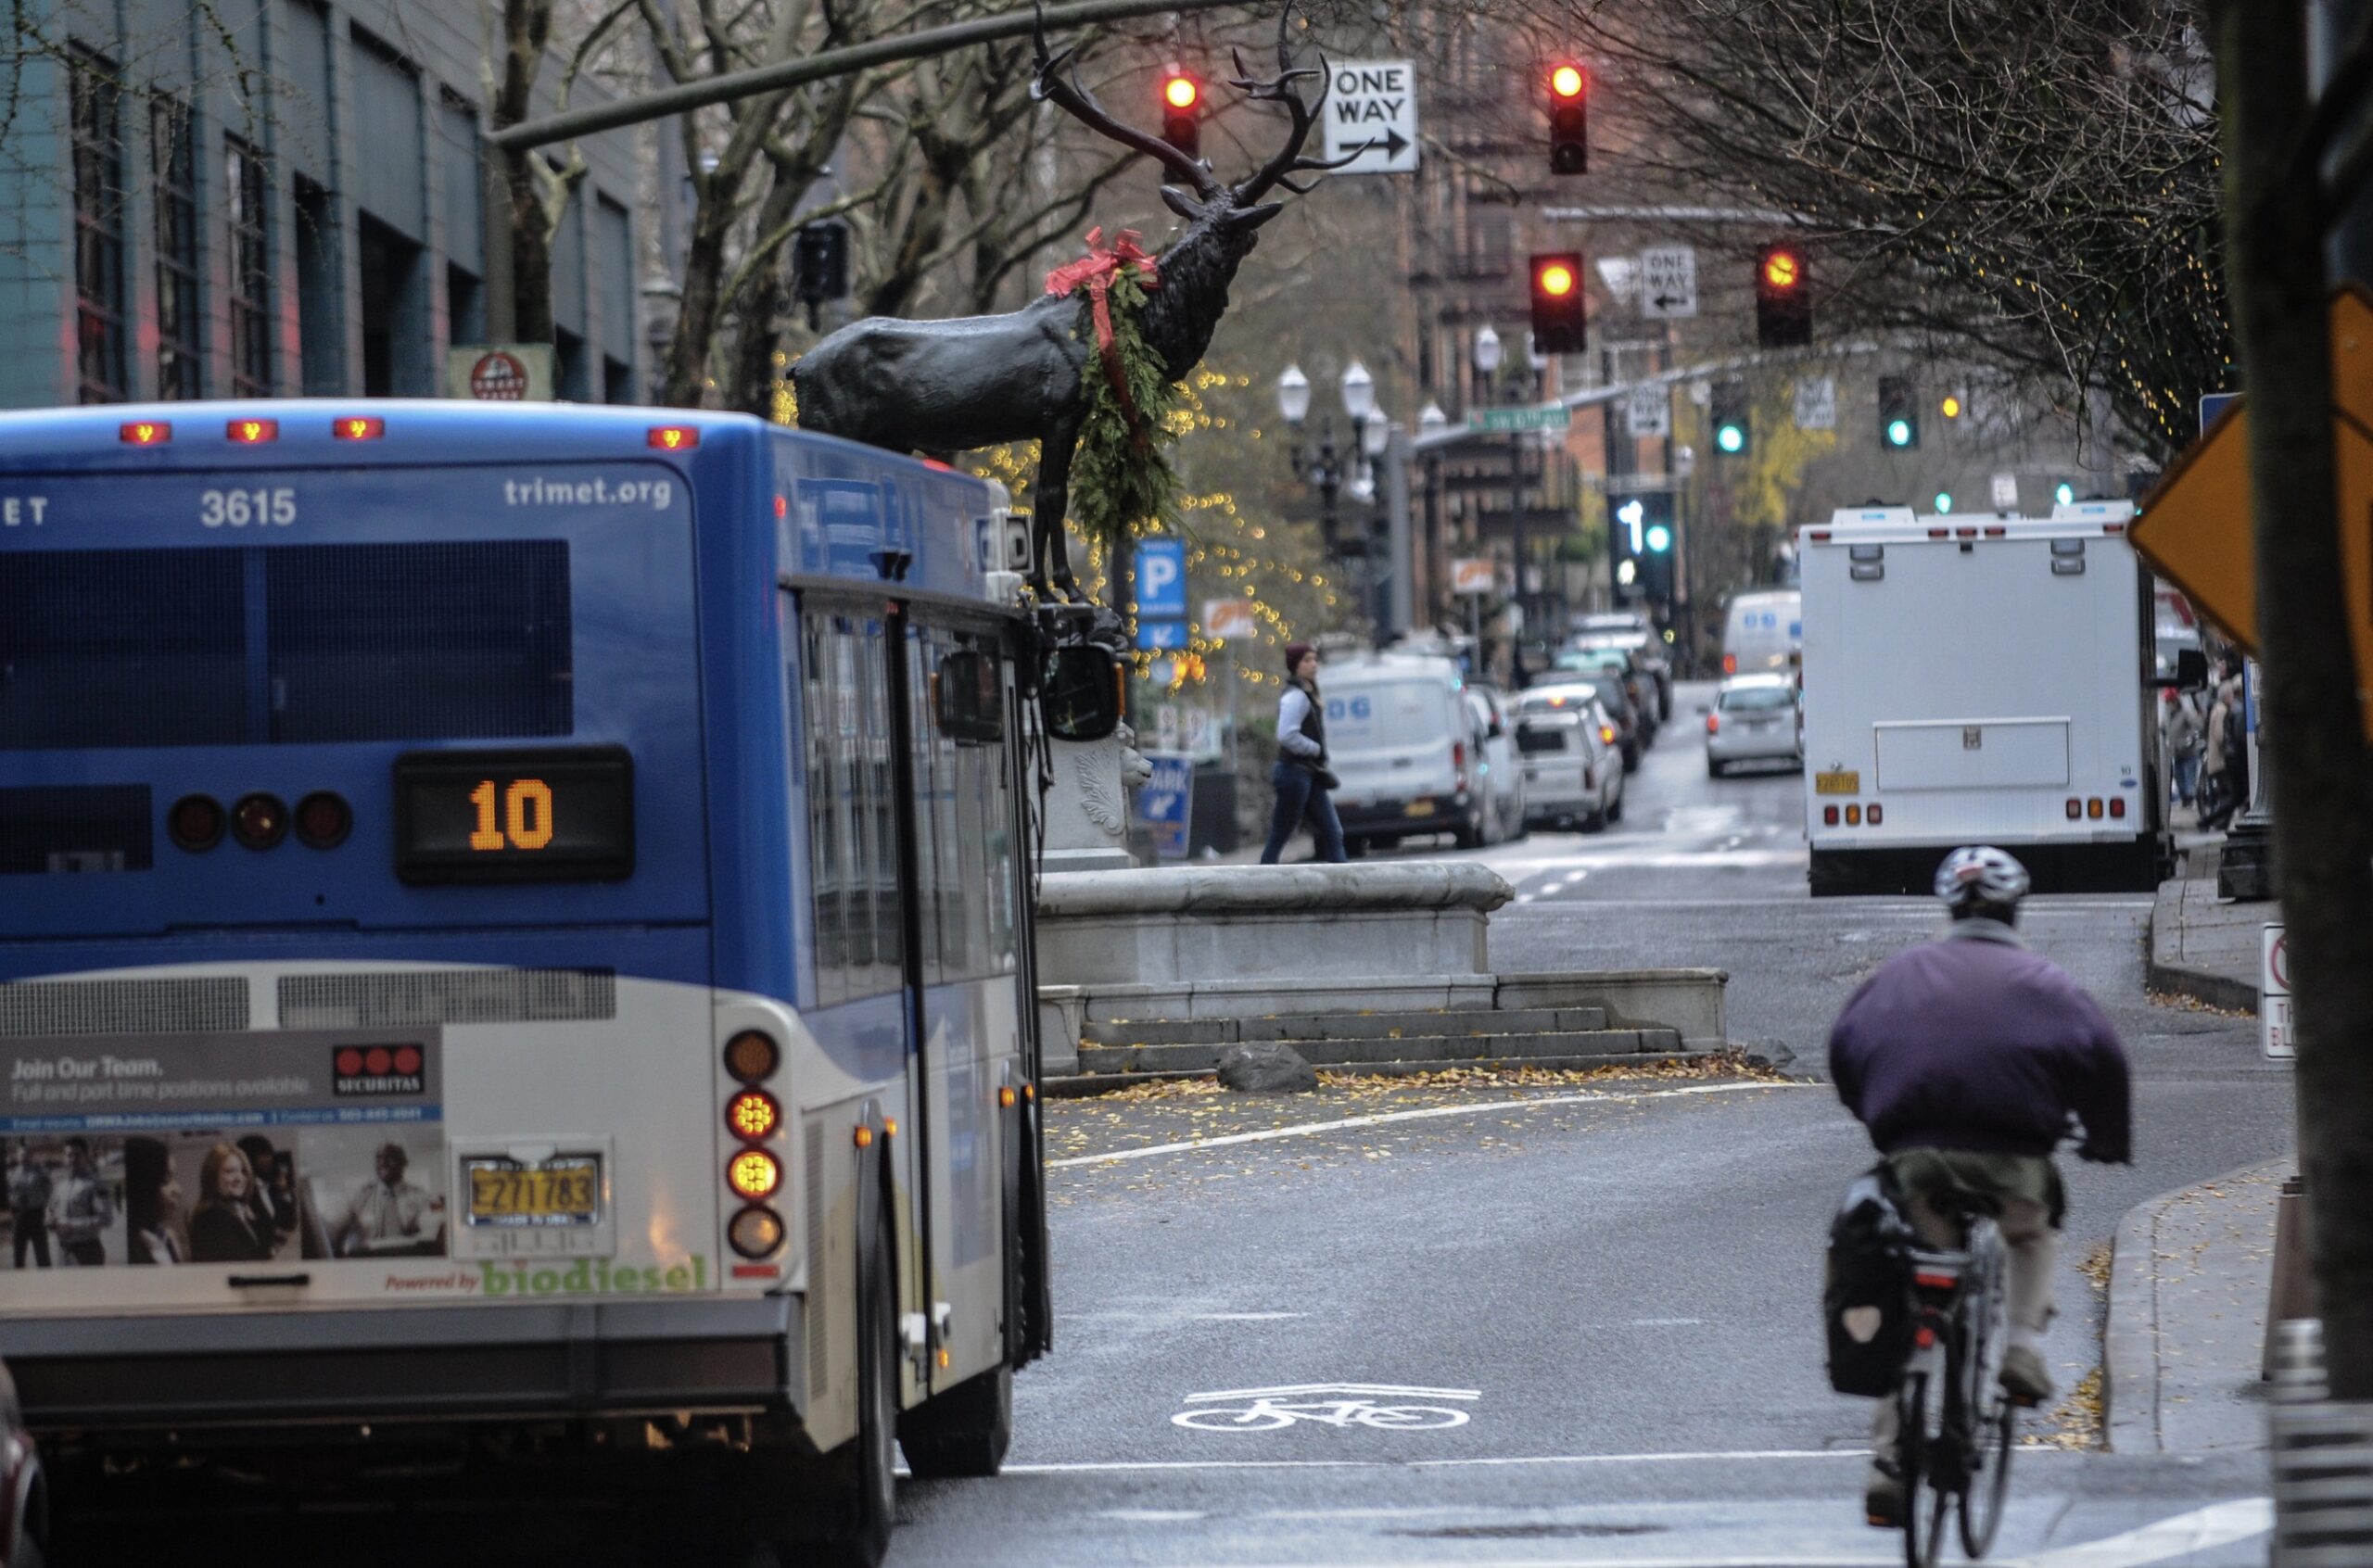 Downtown Portland street with bus, bike rider and the Thompson Elk Fountain on Main.